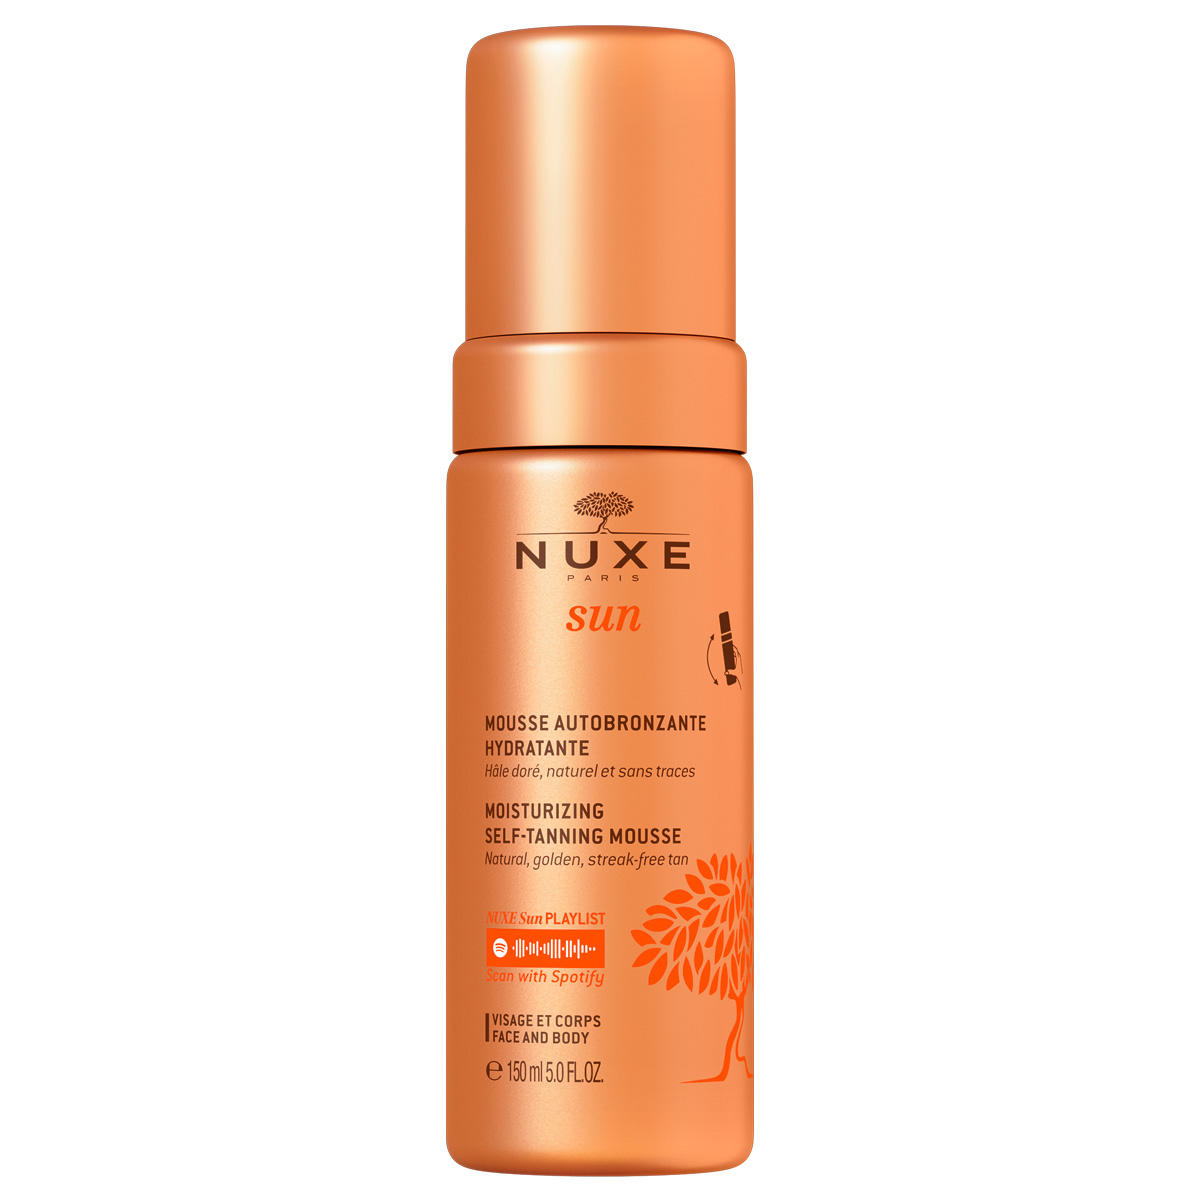 NUXE Sun Hydraterende Zelfbruinende Mousse 150 ml - 1